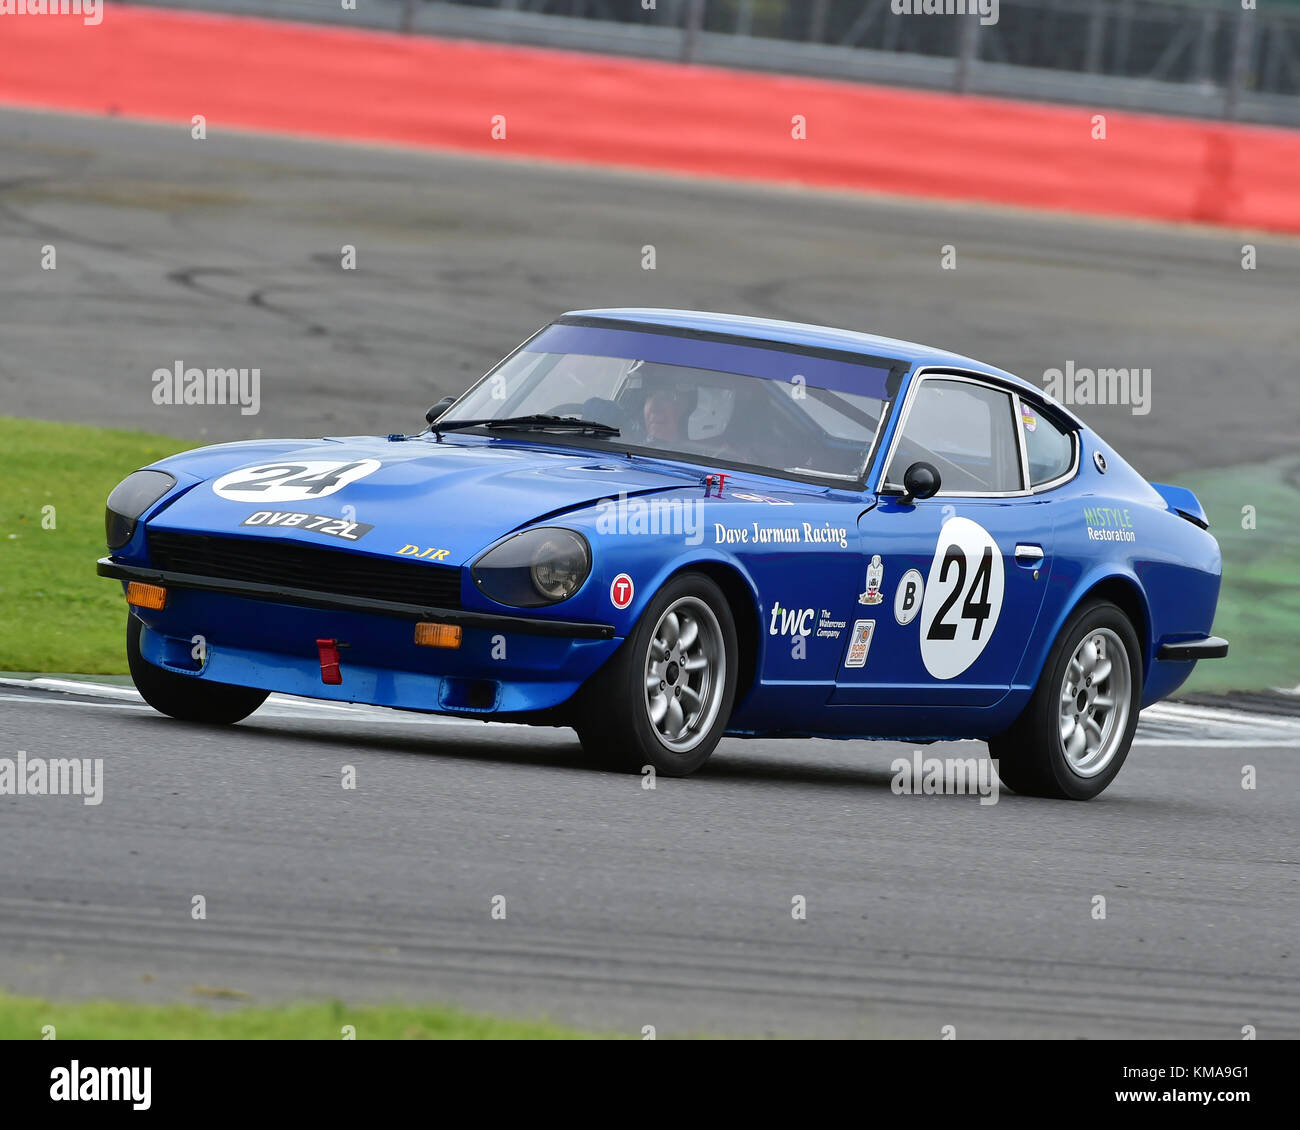 Charles Barter, Datsun 240Z, 70's Road Sports, HSCC, Silverstone International Trophy, Silverstone Historic Festival Meeting, 20th May 2017, Chris McE Stock Photo